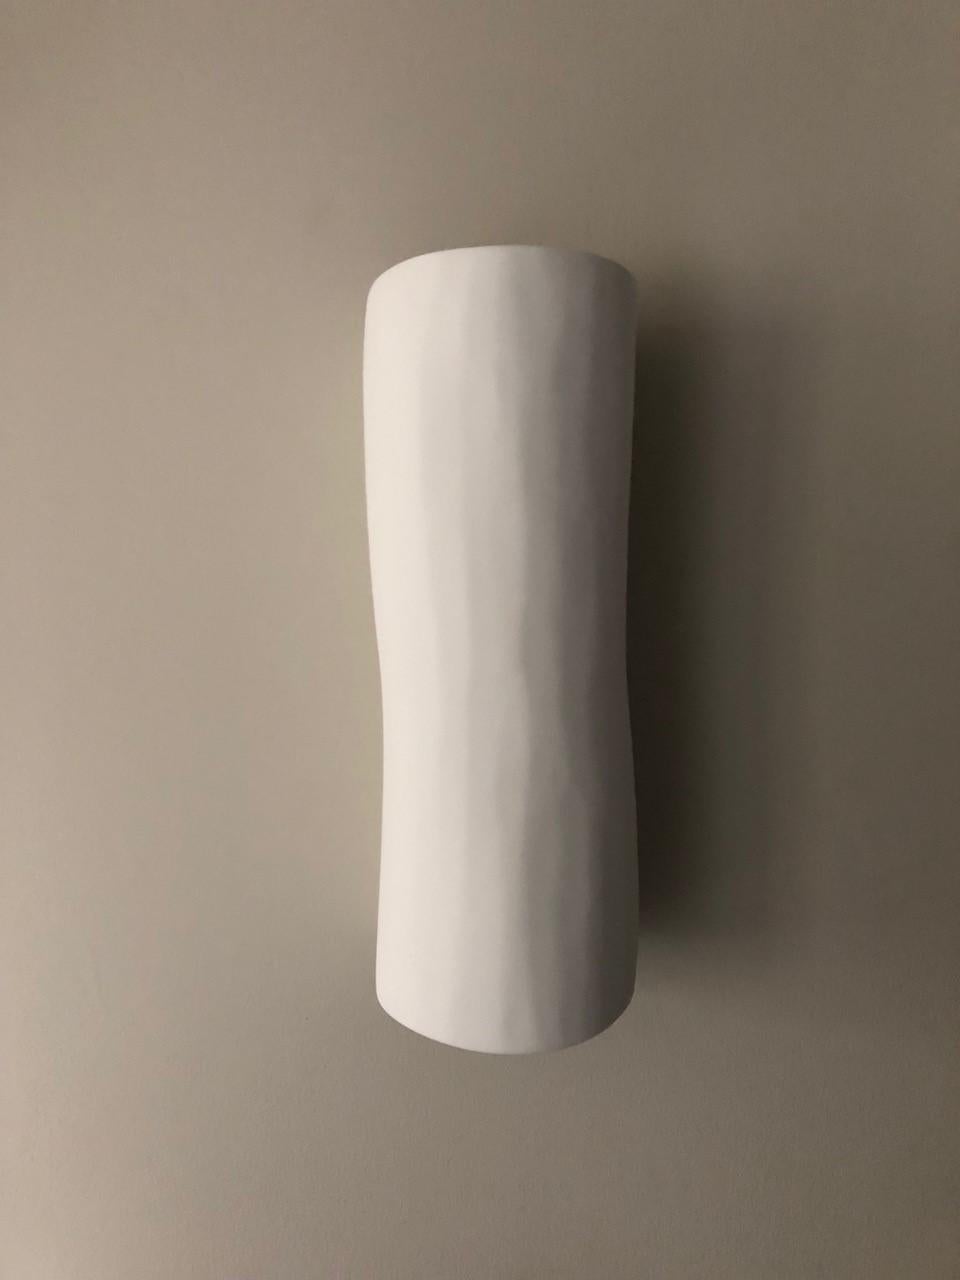 Serenity Sofie Contemporary Wall Sconce/Light, Weißer Gips, Hannah Woodhouse im Angebot 1